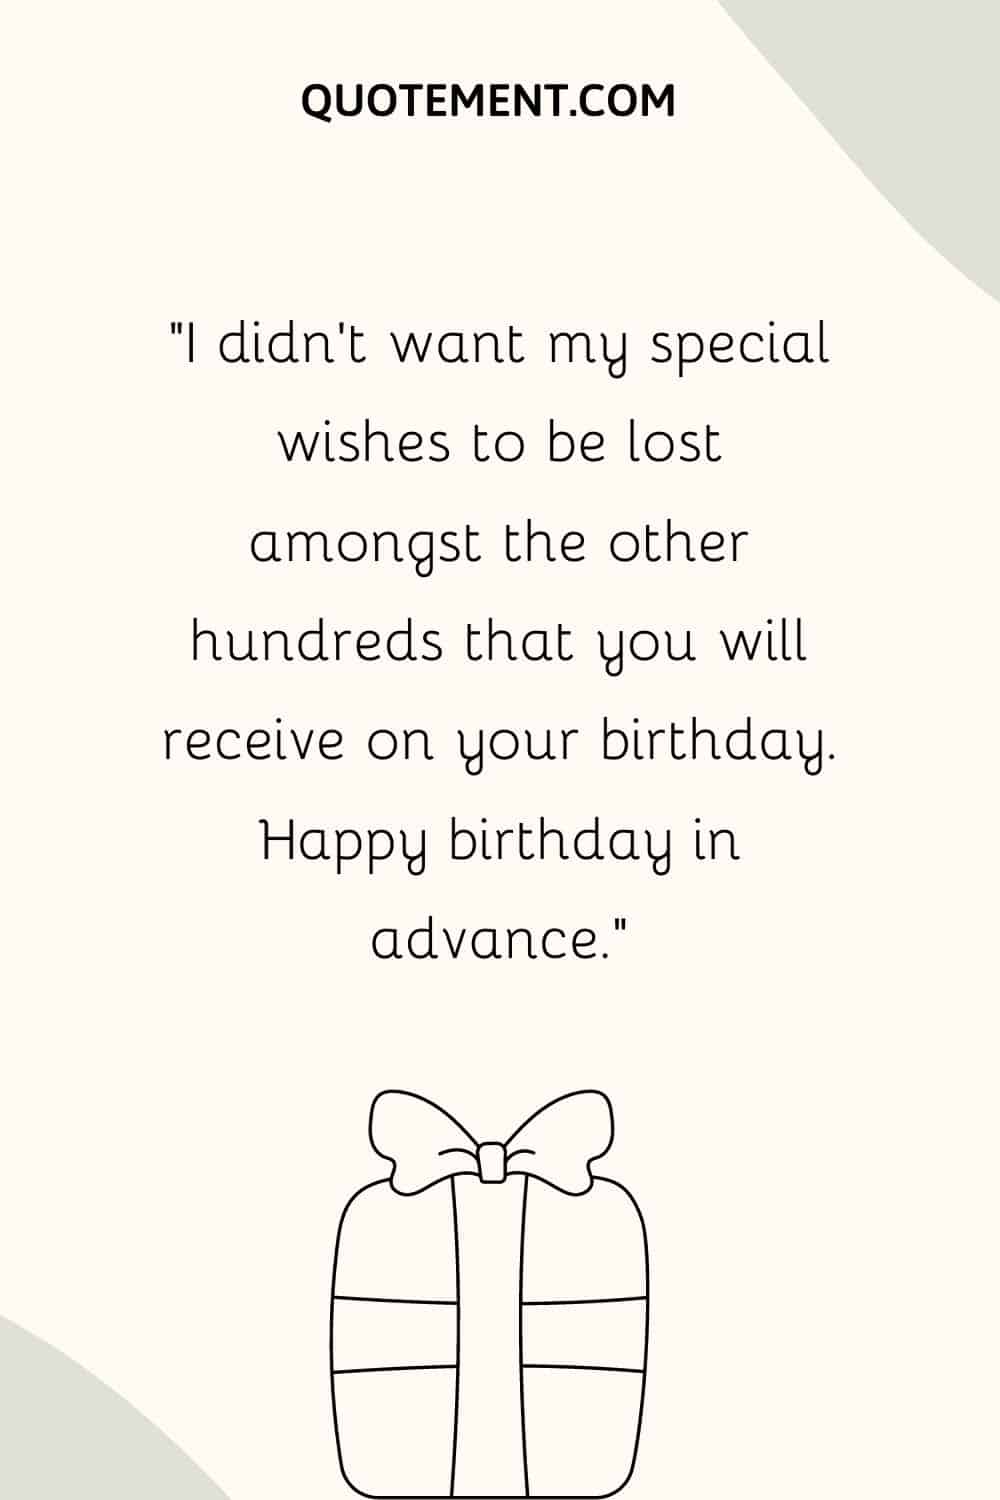 I didn’t want my special wishes to be lost amongst the other hundreds that you will receive on your birthday